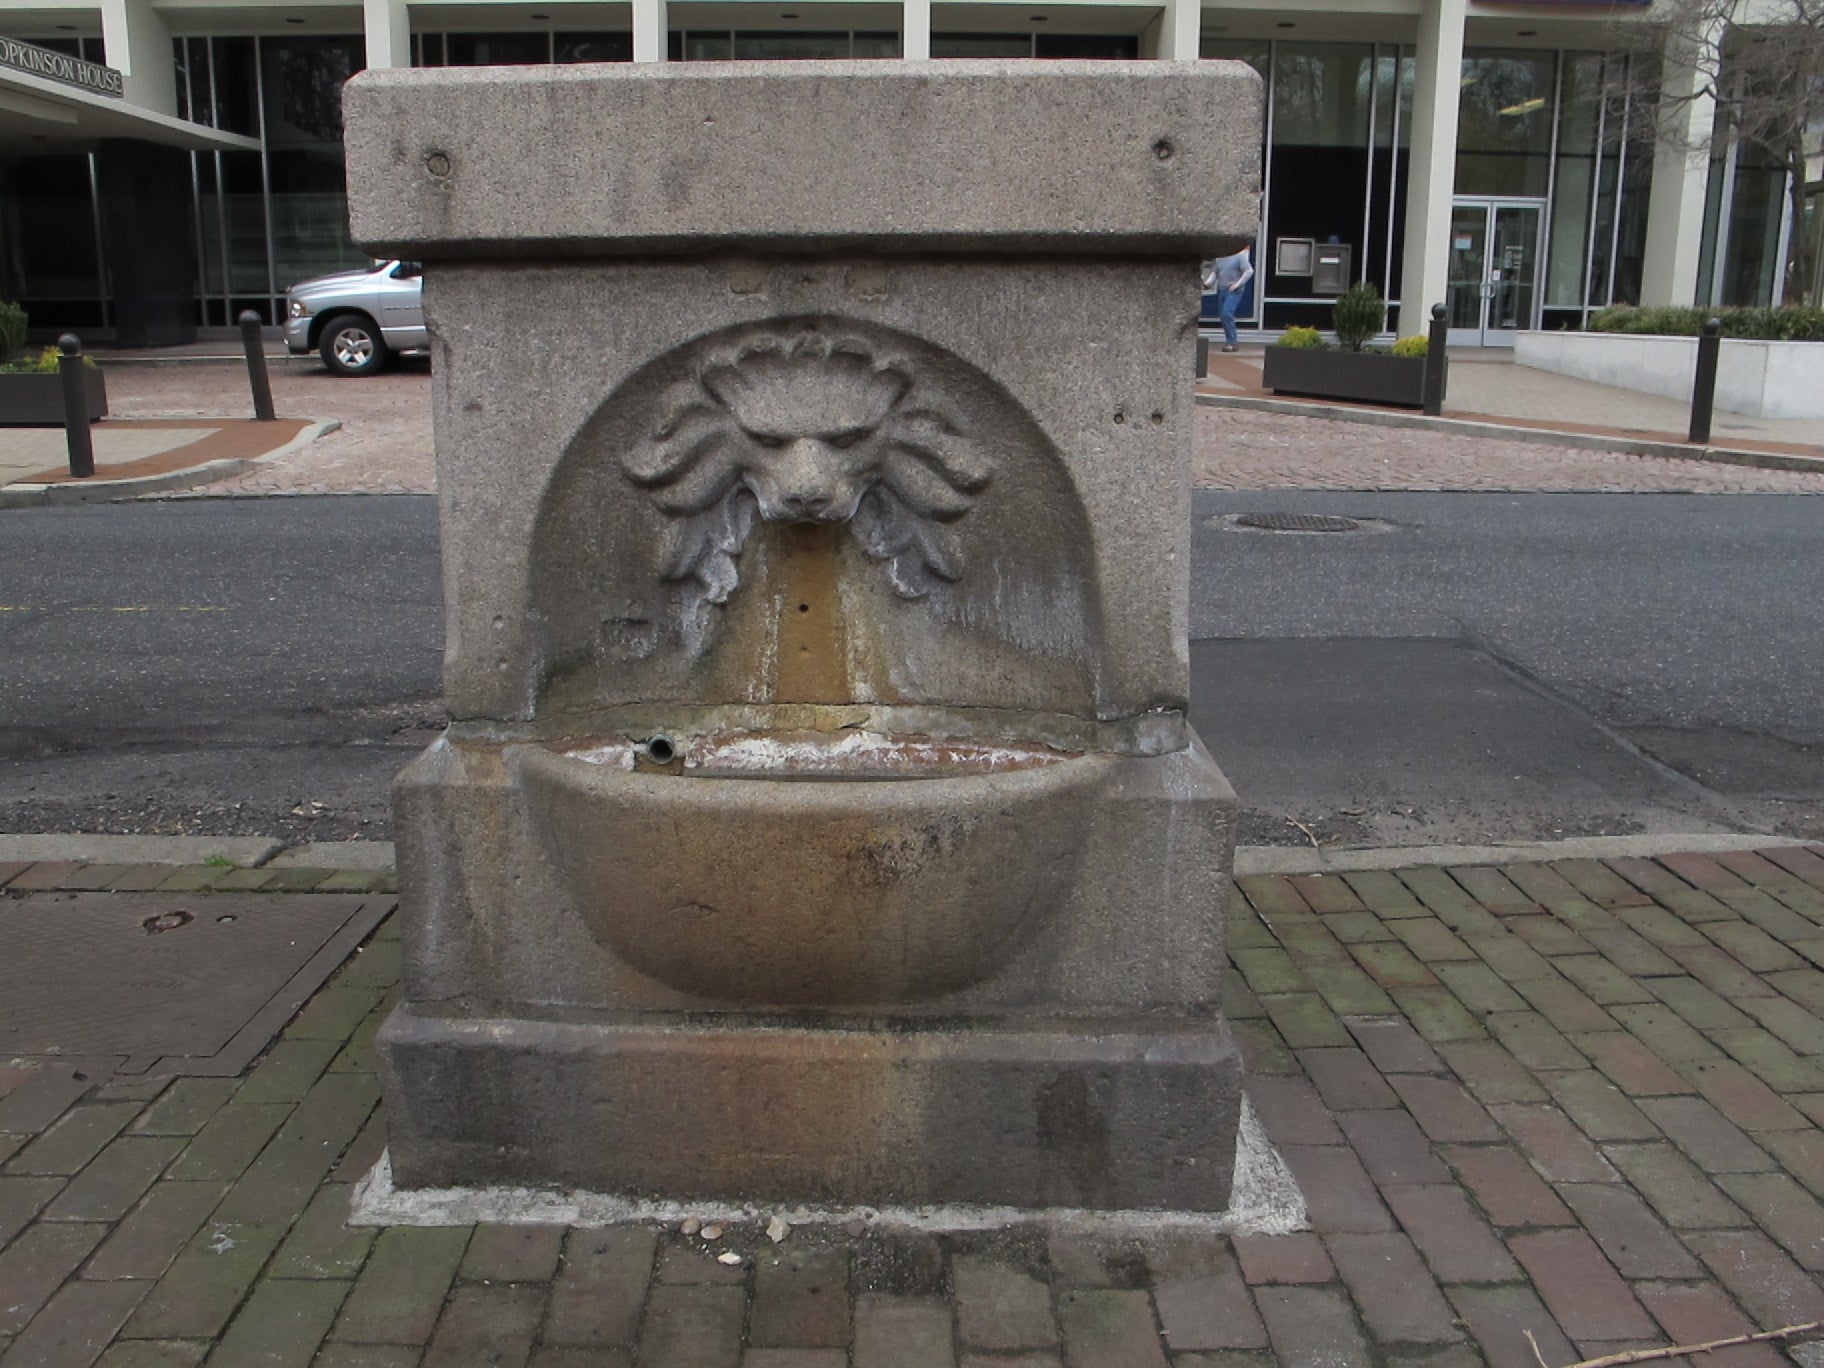 This side of the fountain at Washington Square was meant for people to drink from. 